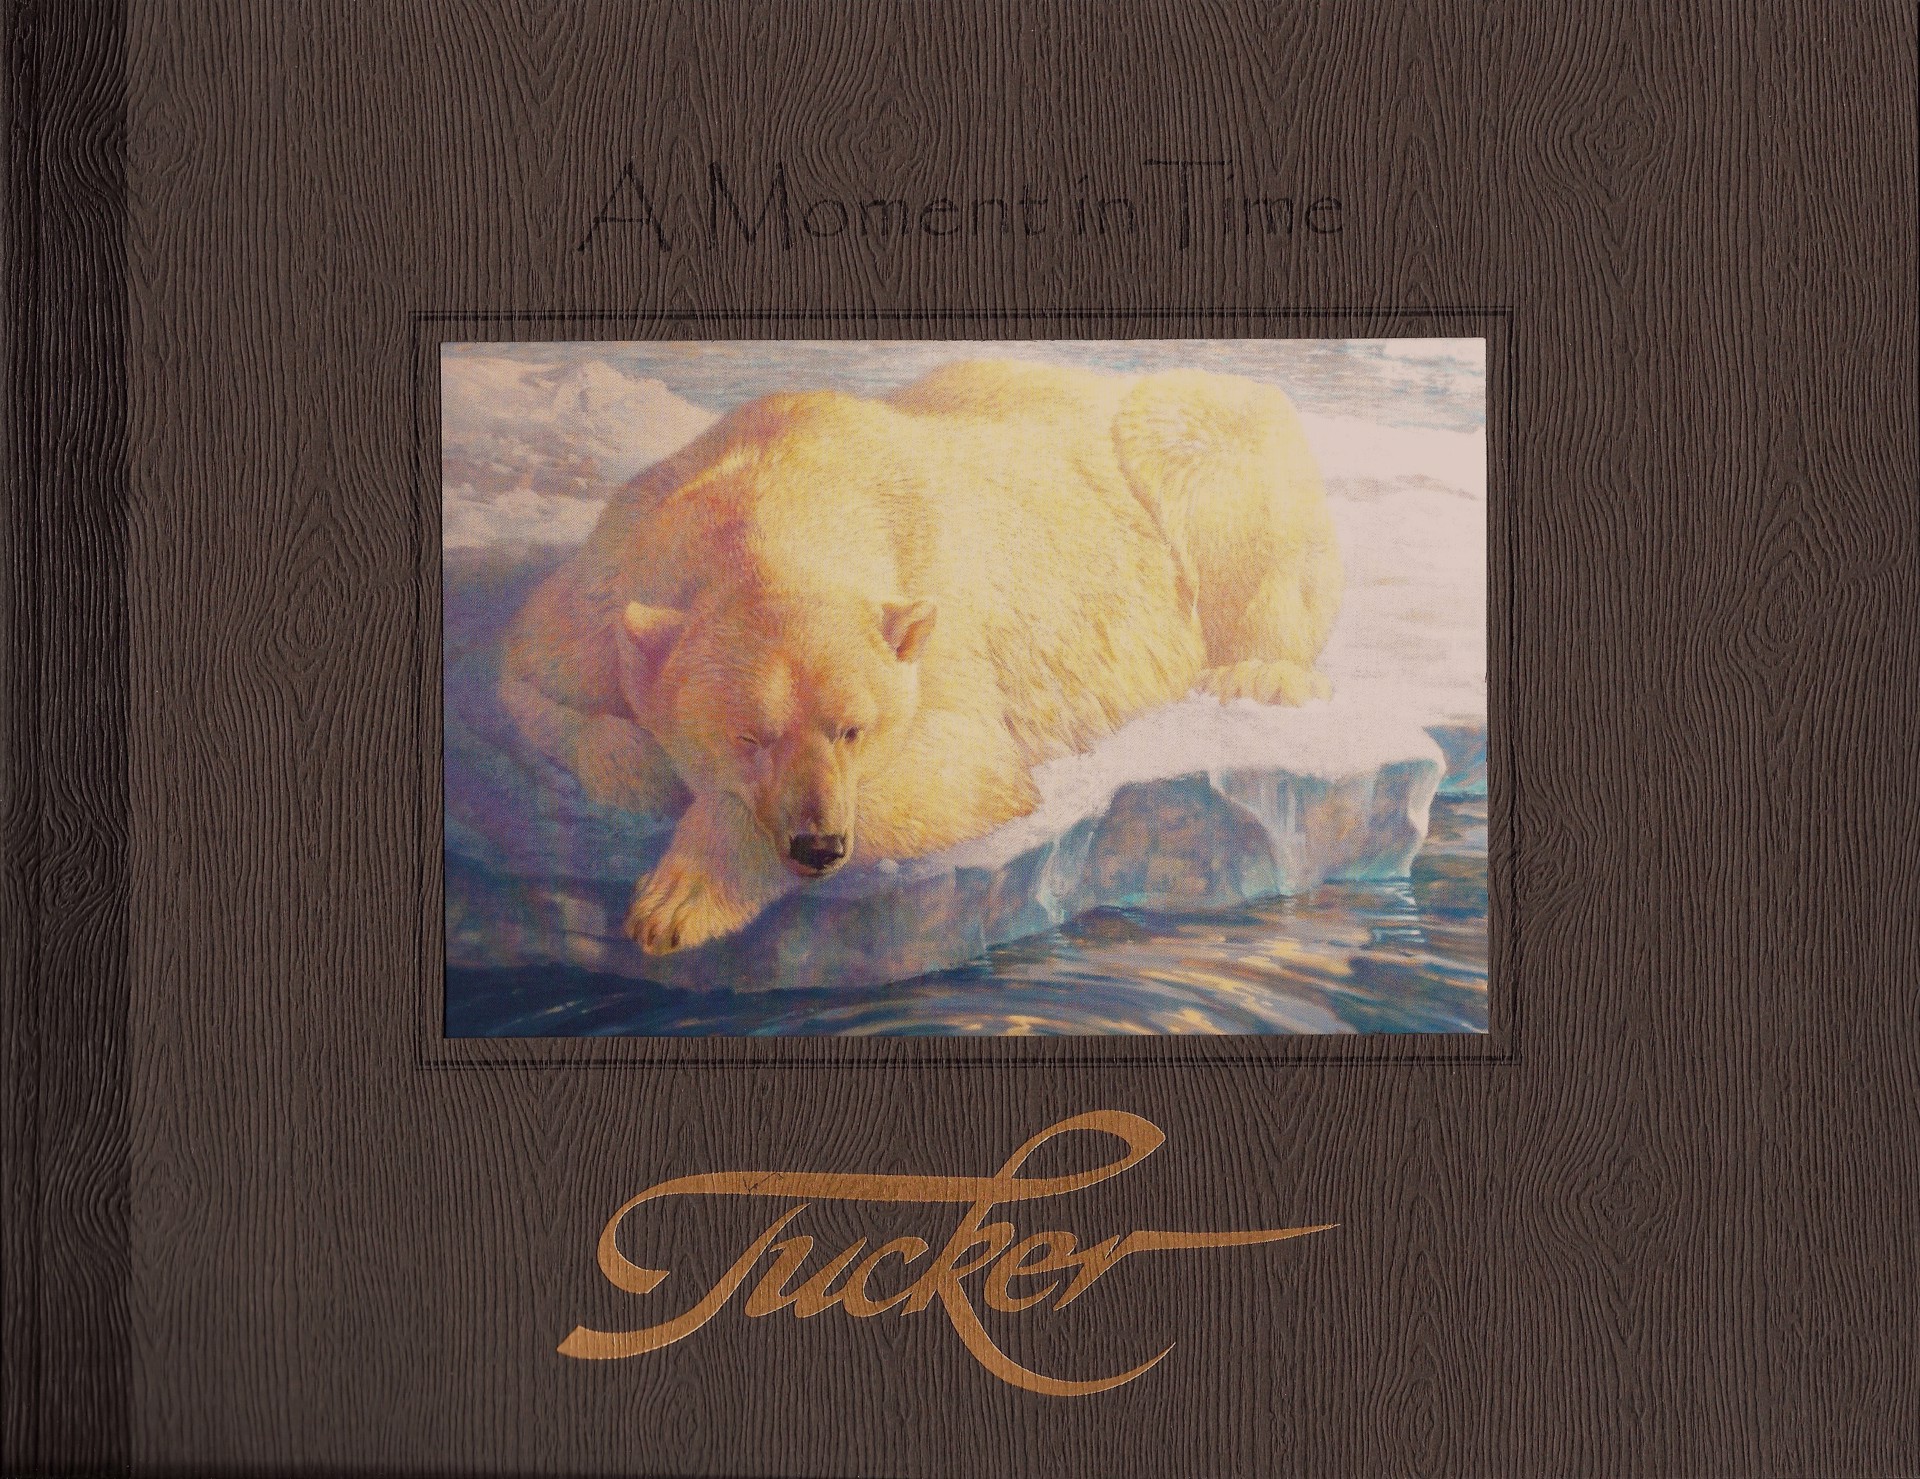 A Moment in Time-Book by Ezra Tucker